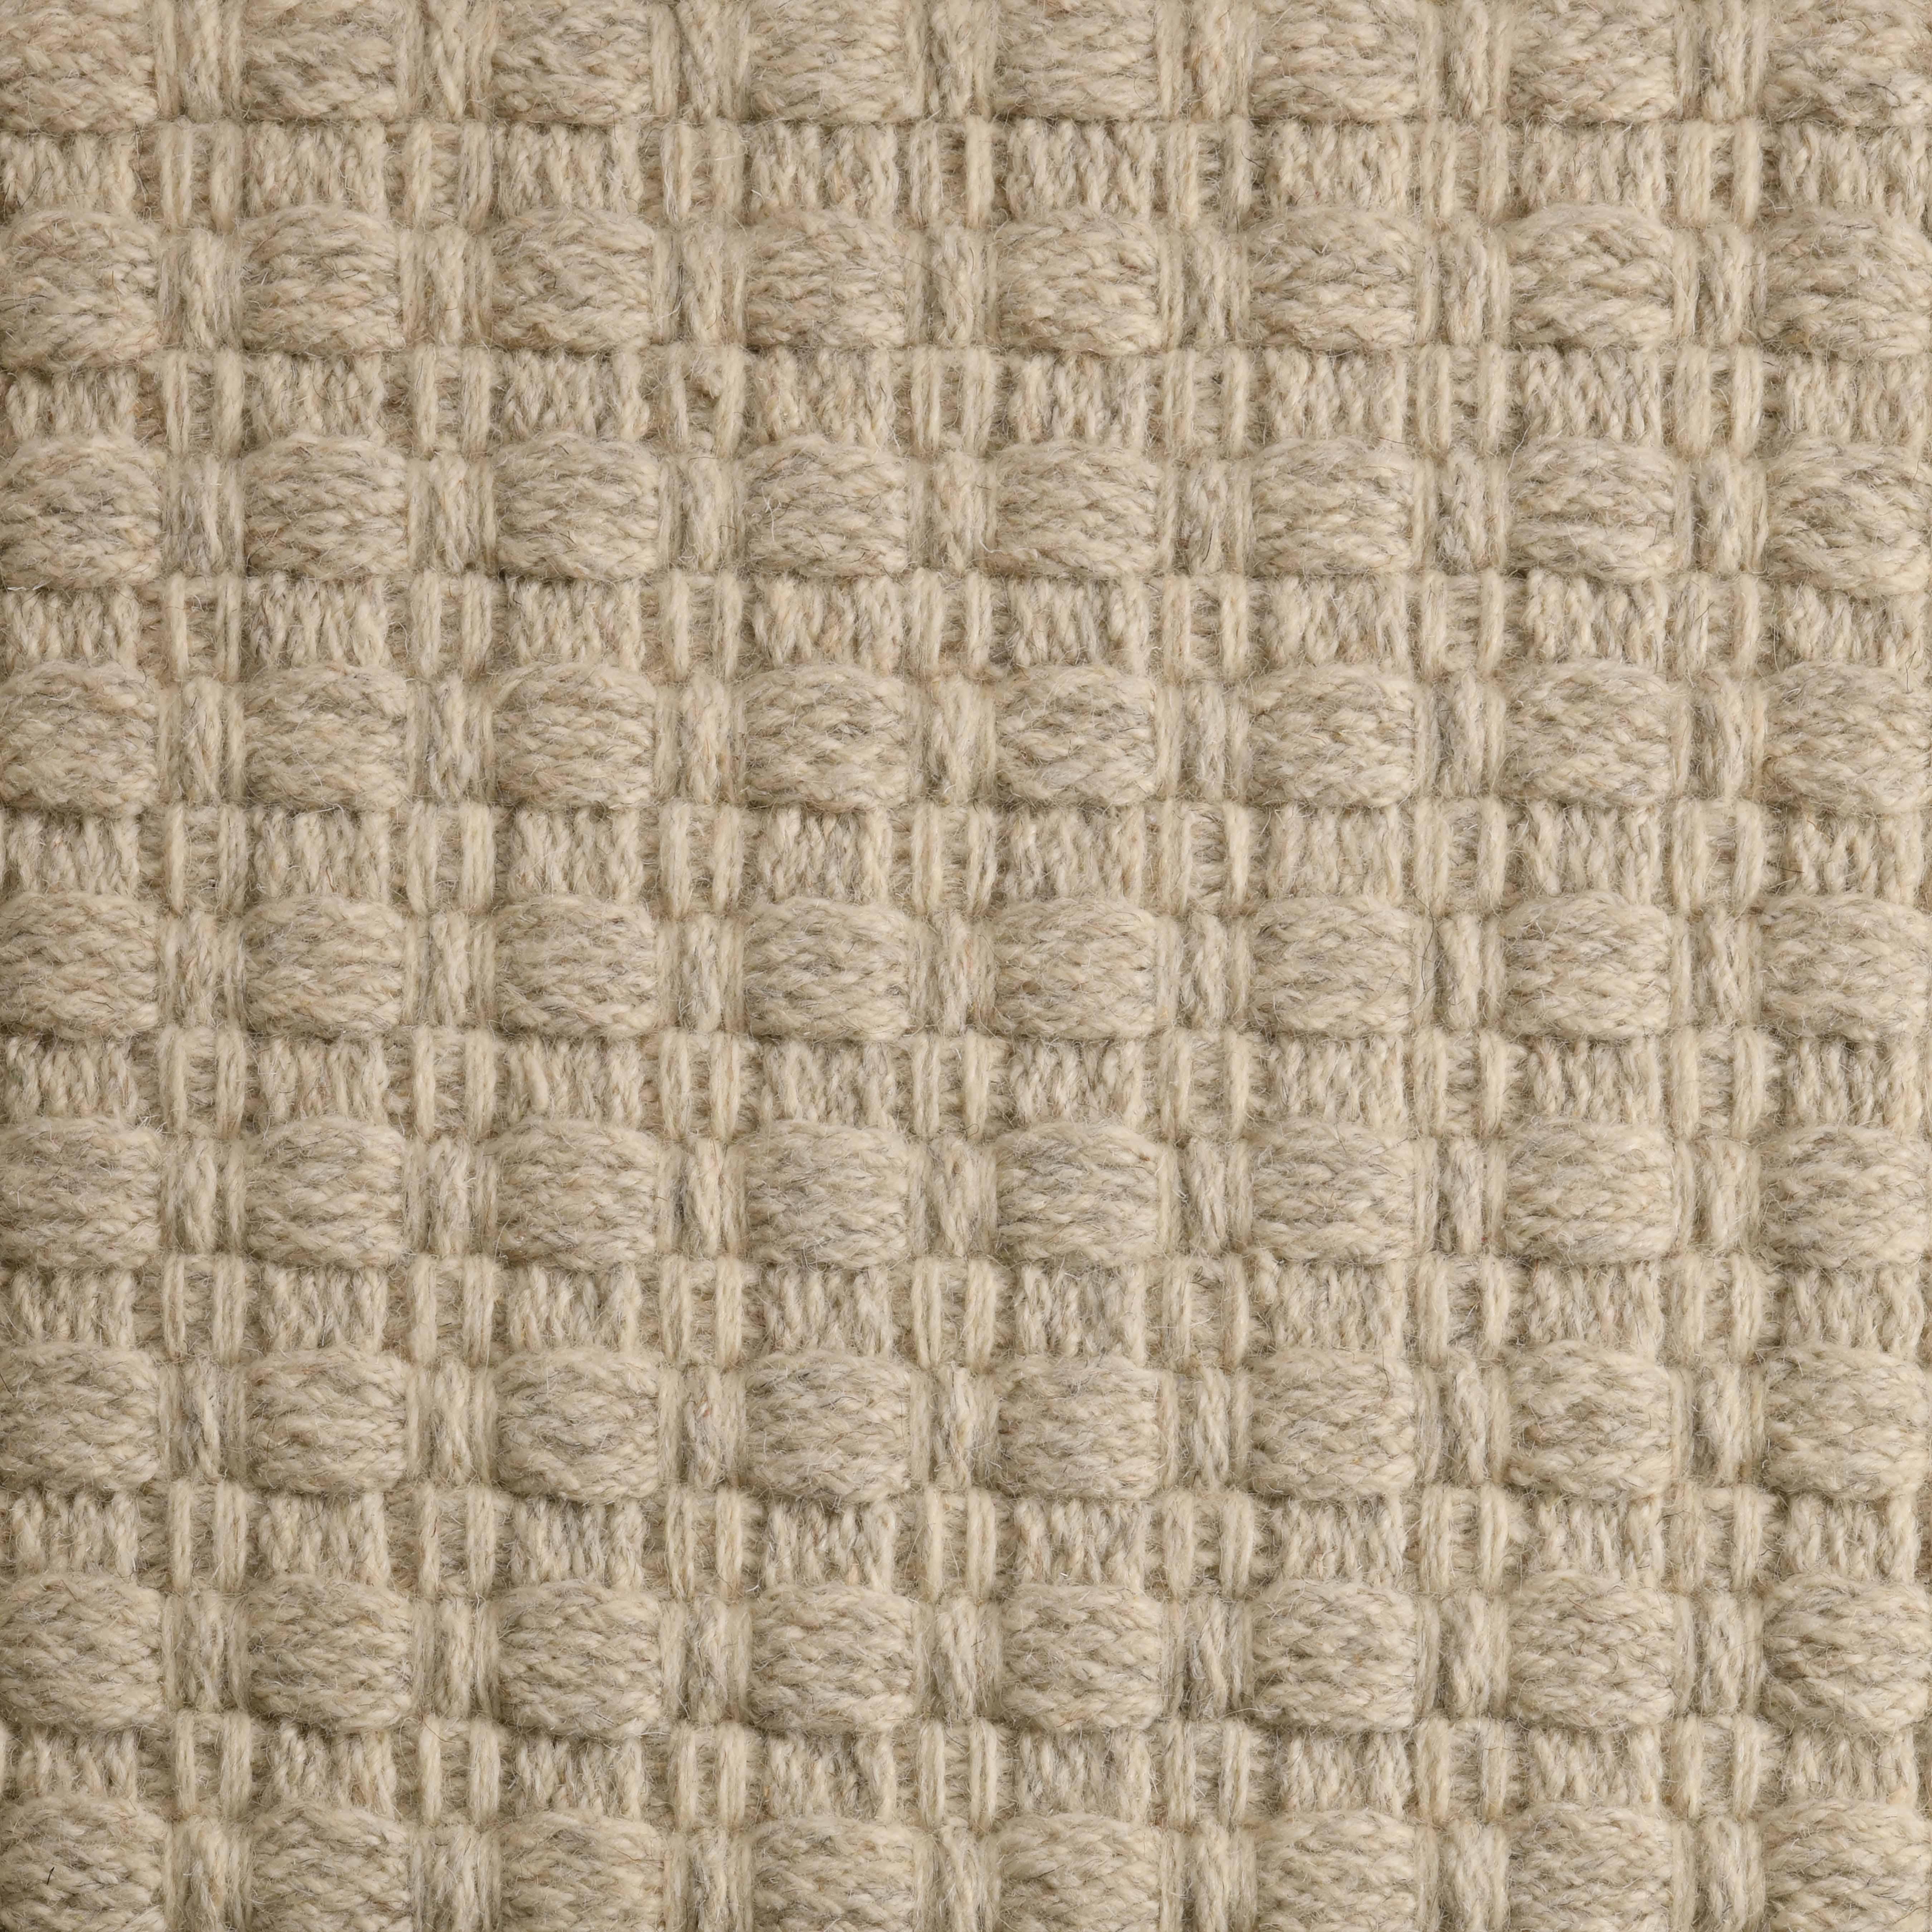 Contemporary Una, Ash, Handwoven Face 60% Undyed NZ Wool, 40% Undyed MED Wool, 6' x 9' For Sale